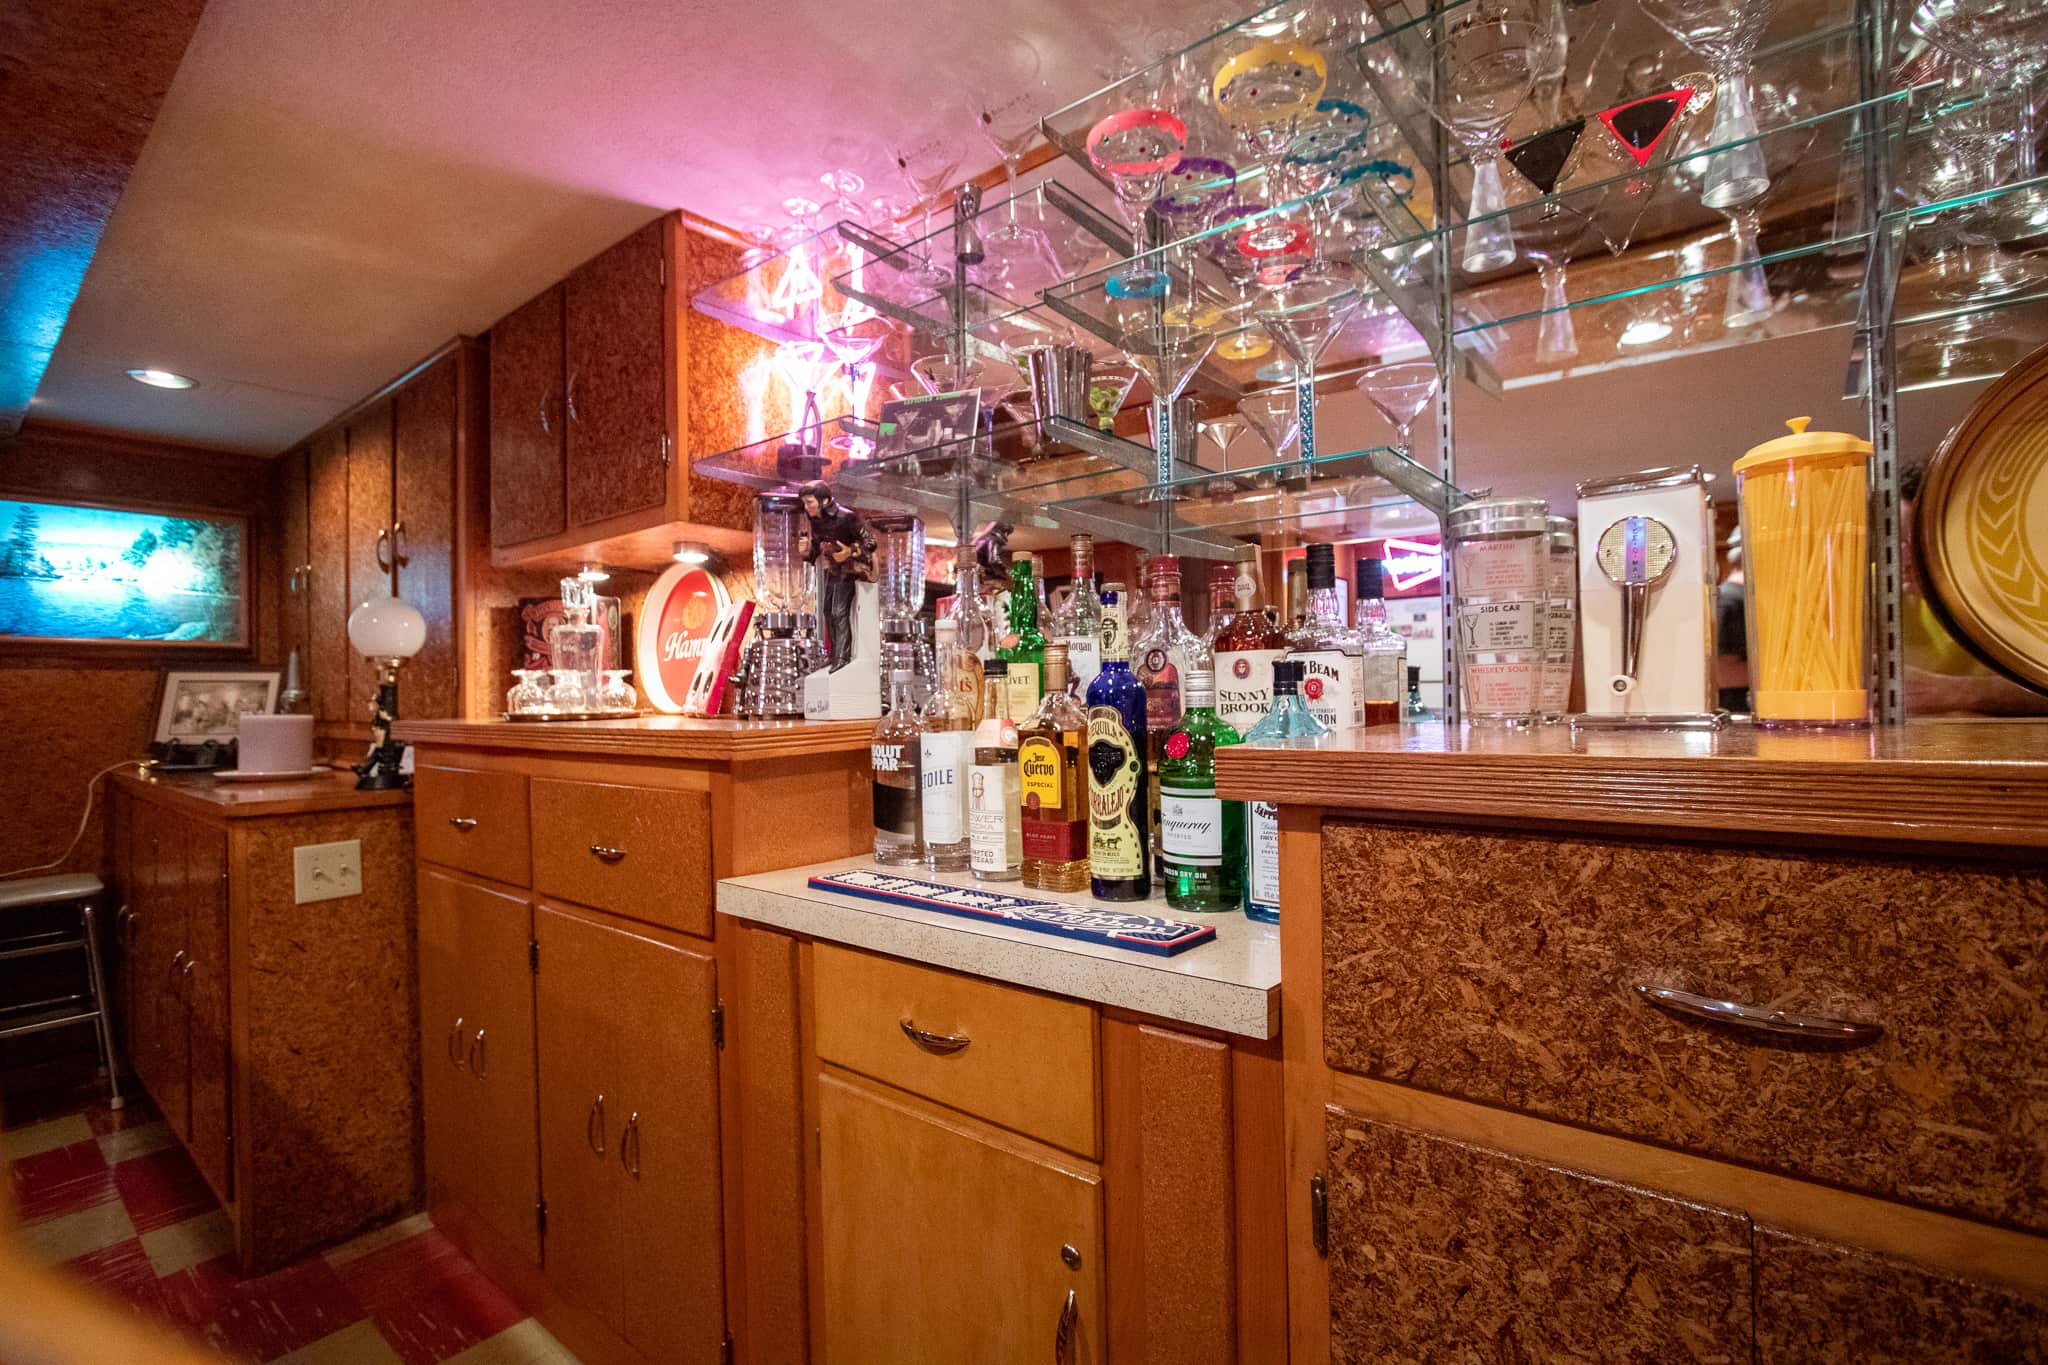 Vic and Nancy enhanced the bar by adding the mirrors and glass shelves.